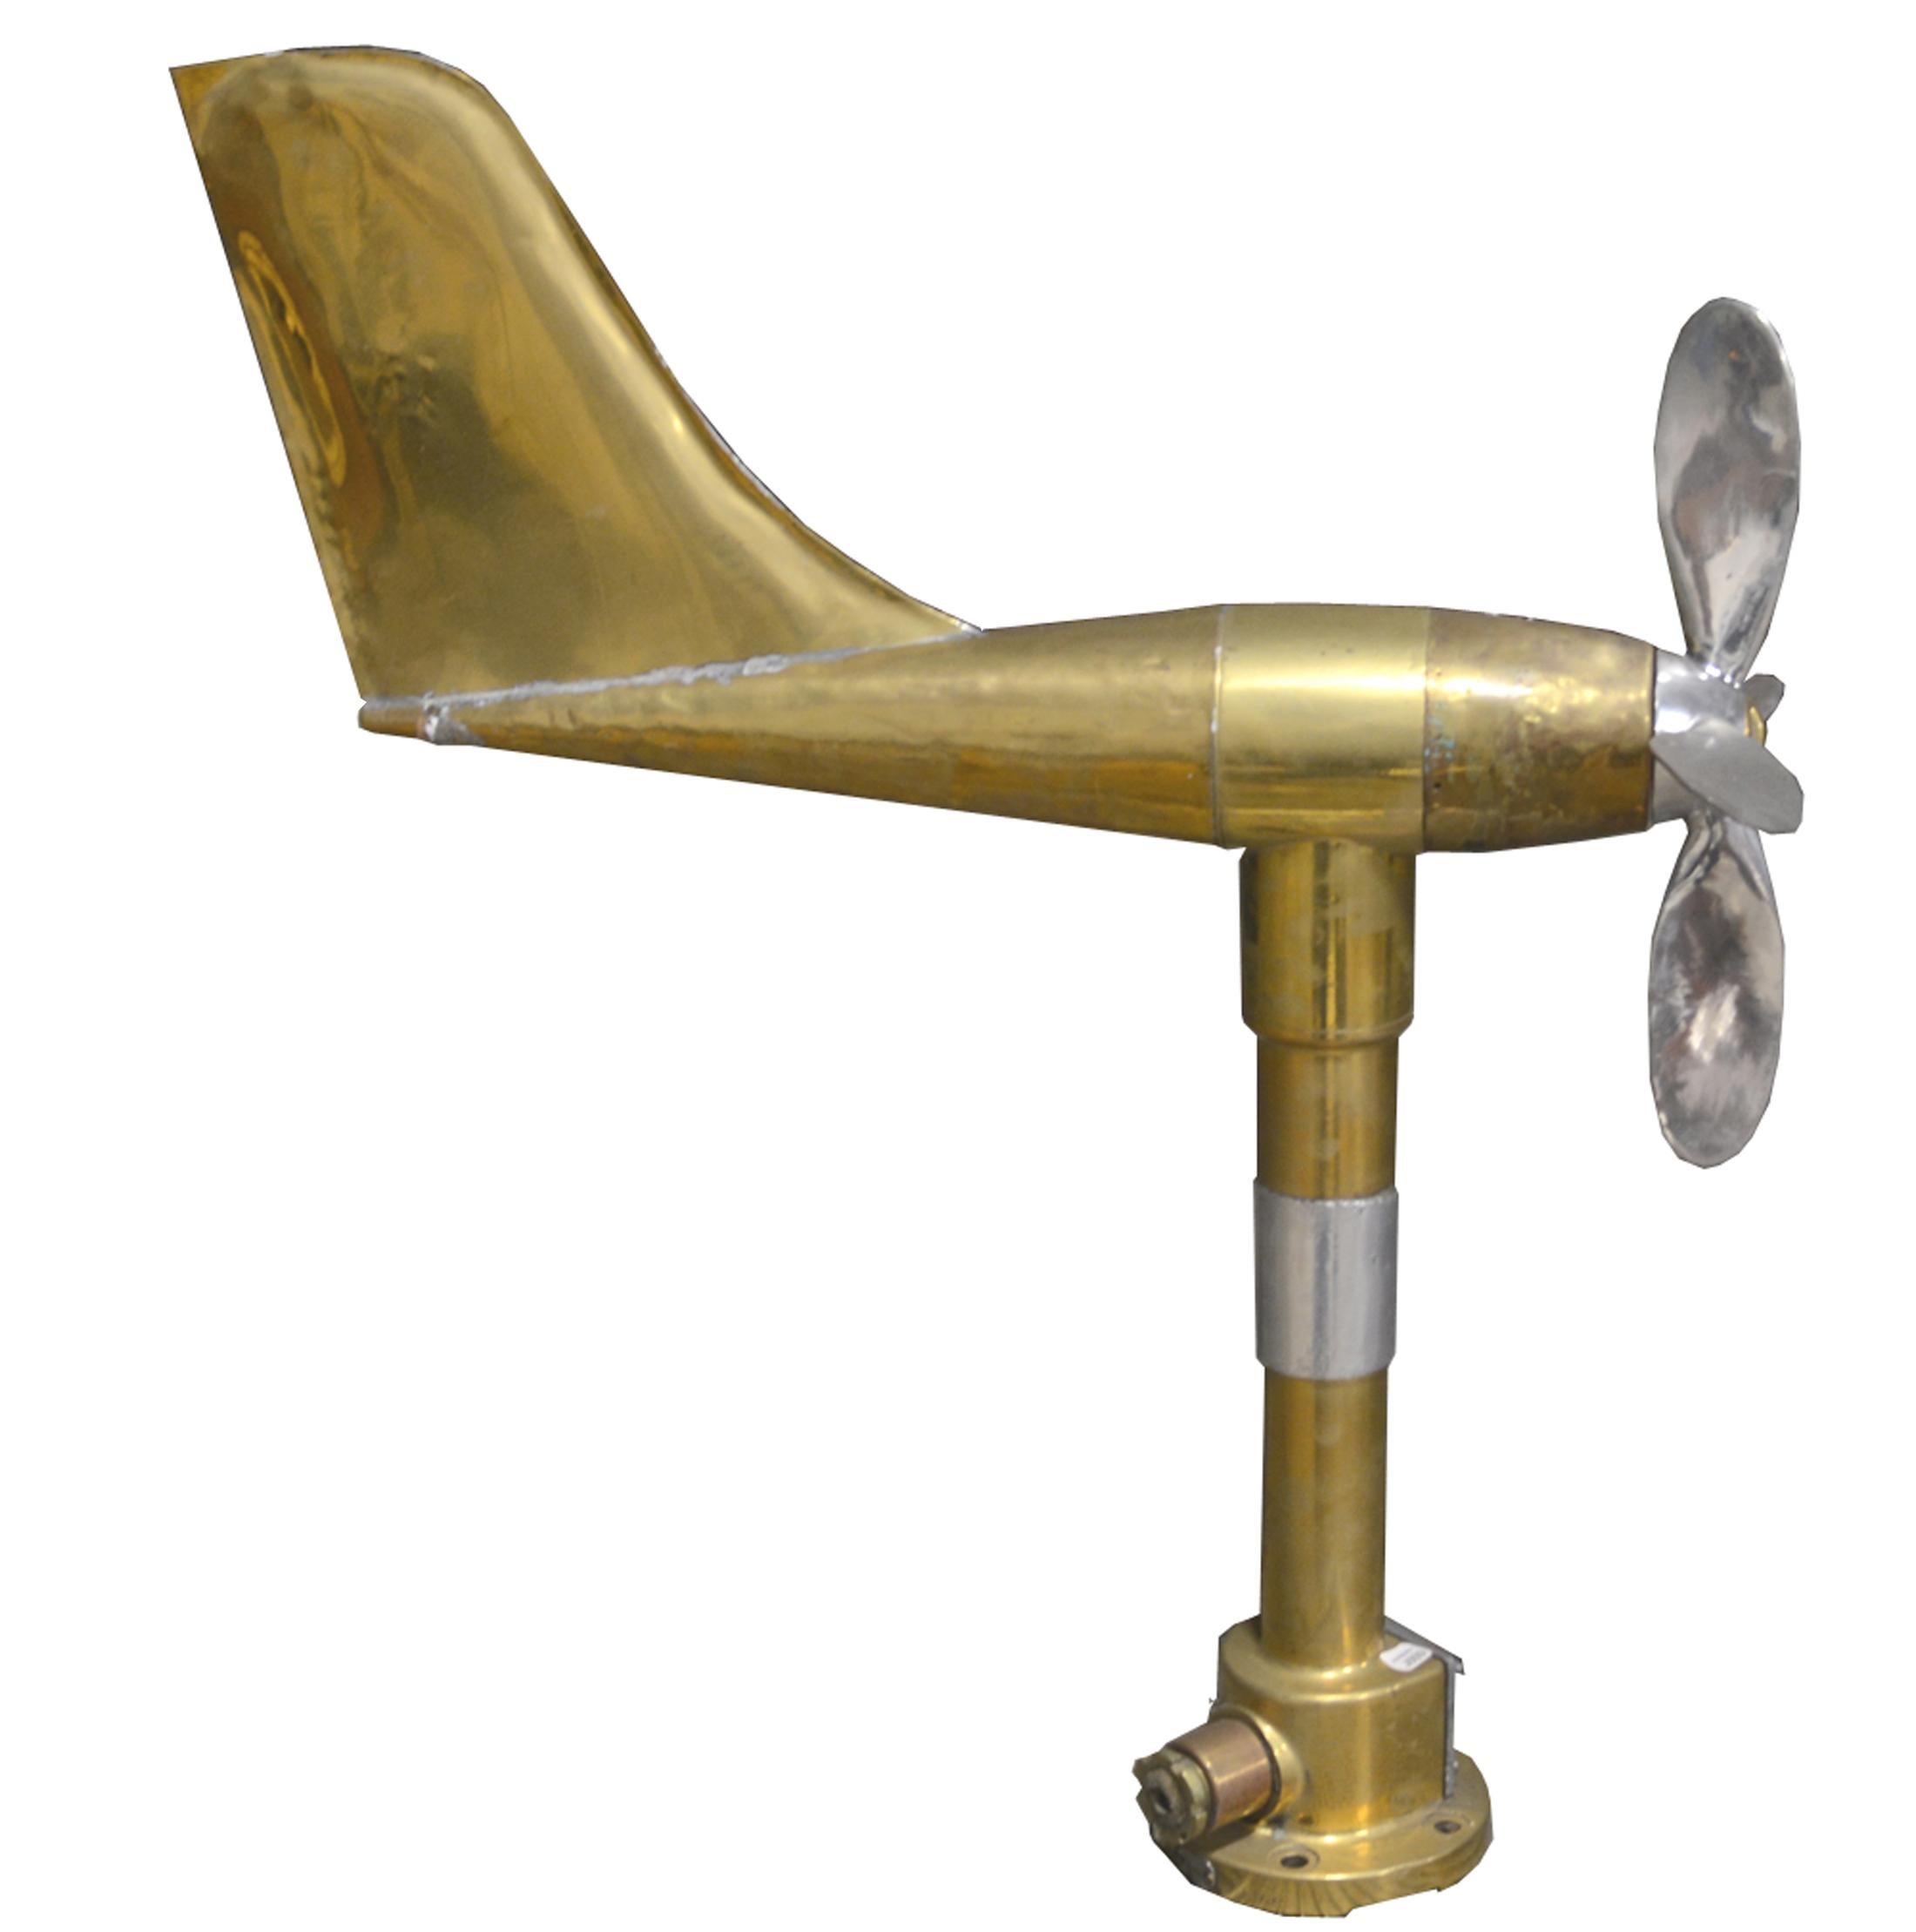 This anemometer was used on ships to measure wind direction and speed. Rare complete brass foot and body, aluminium propeller.
Measures: L 62 / H 78 cm propeller D 34 cm / 11.7 kg
We have another same piece with aluminium propeller and foot,